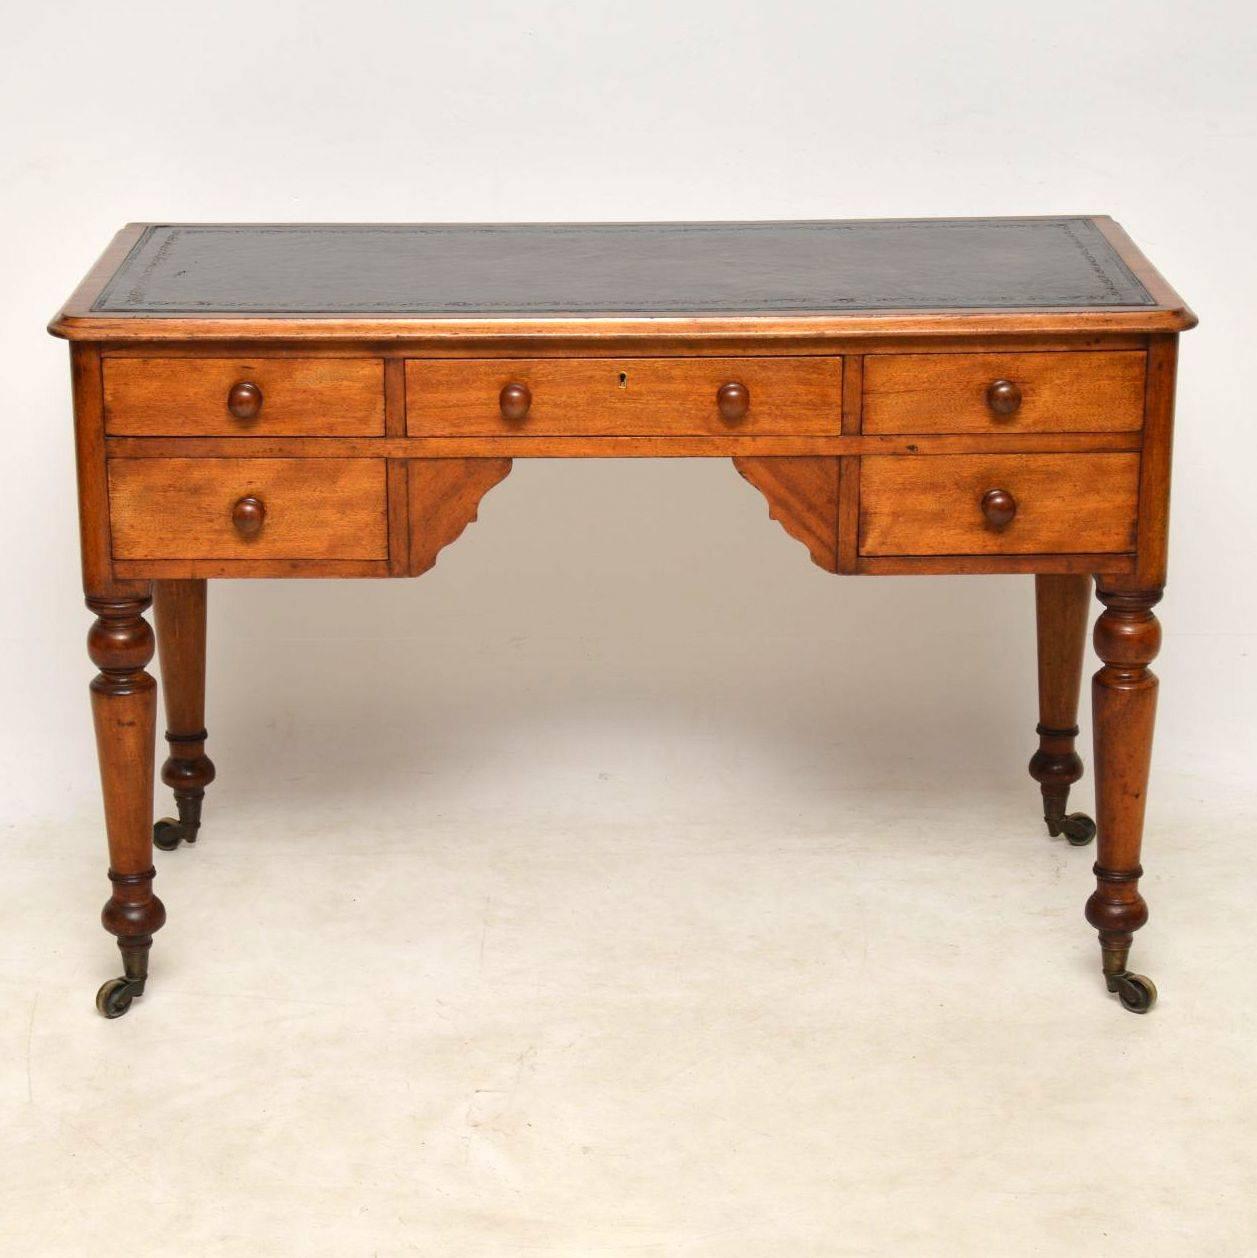 Antique Victorian Satin Birch leather top desk in good original condition, with plenty of character and with a lovely mellow color. It has a tooled leather writing surface, a polished back, well turned legs and original brass casters. The drawers